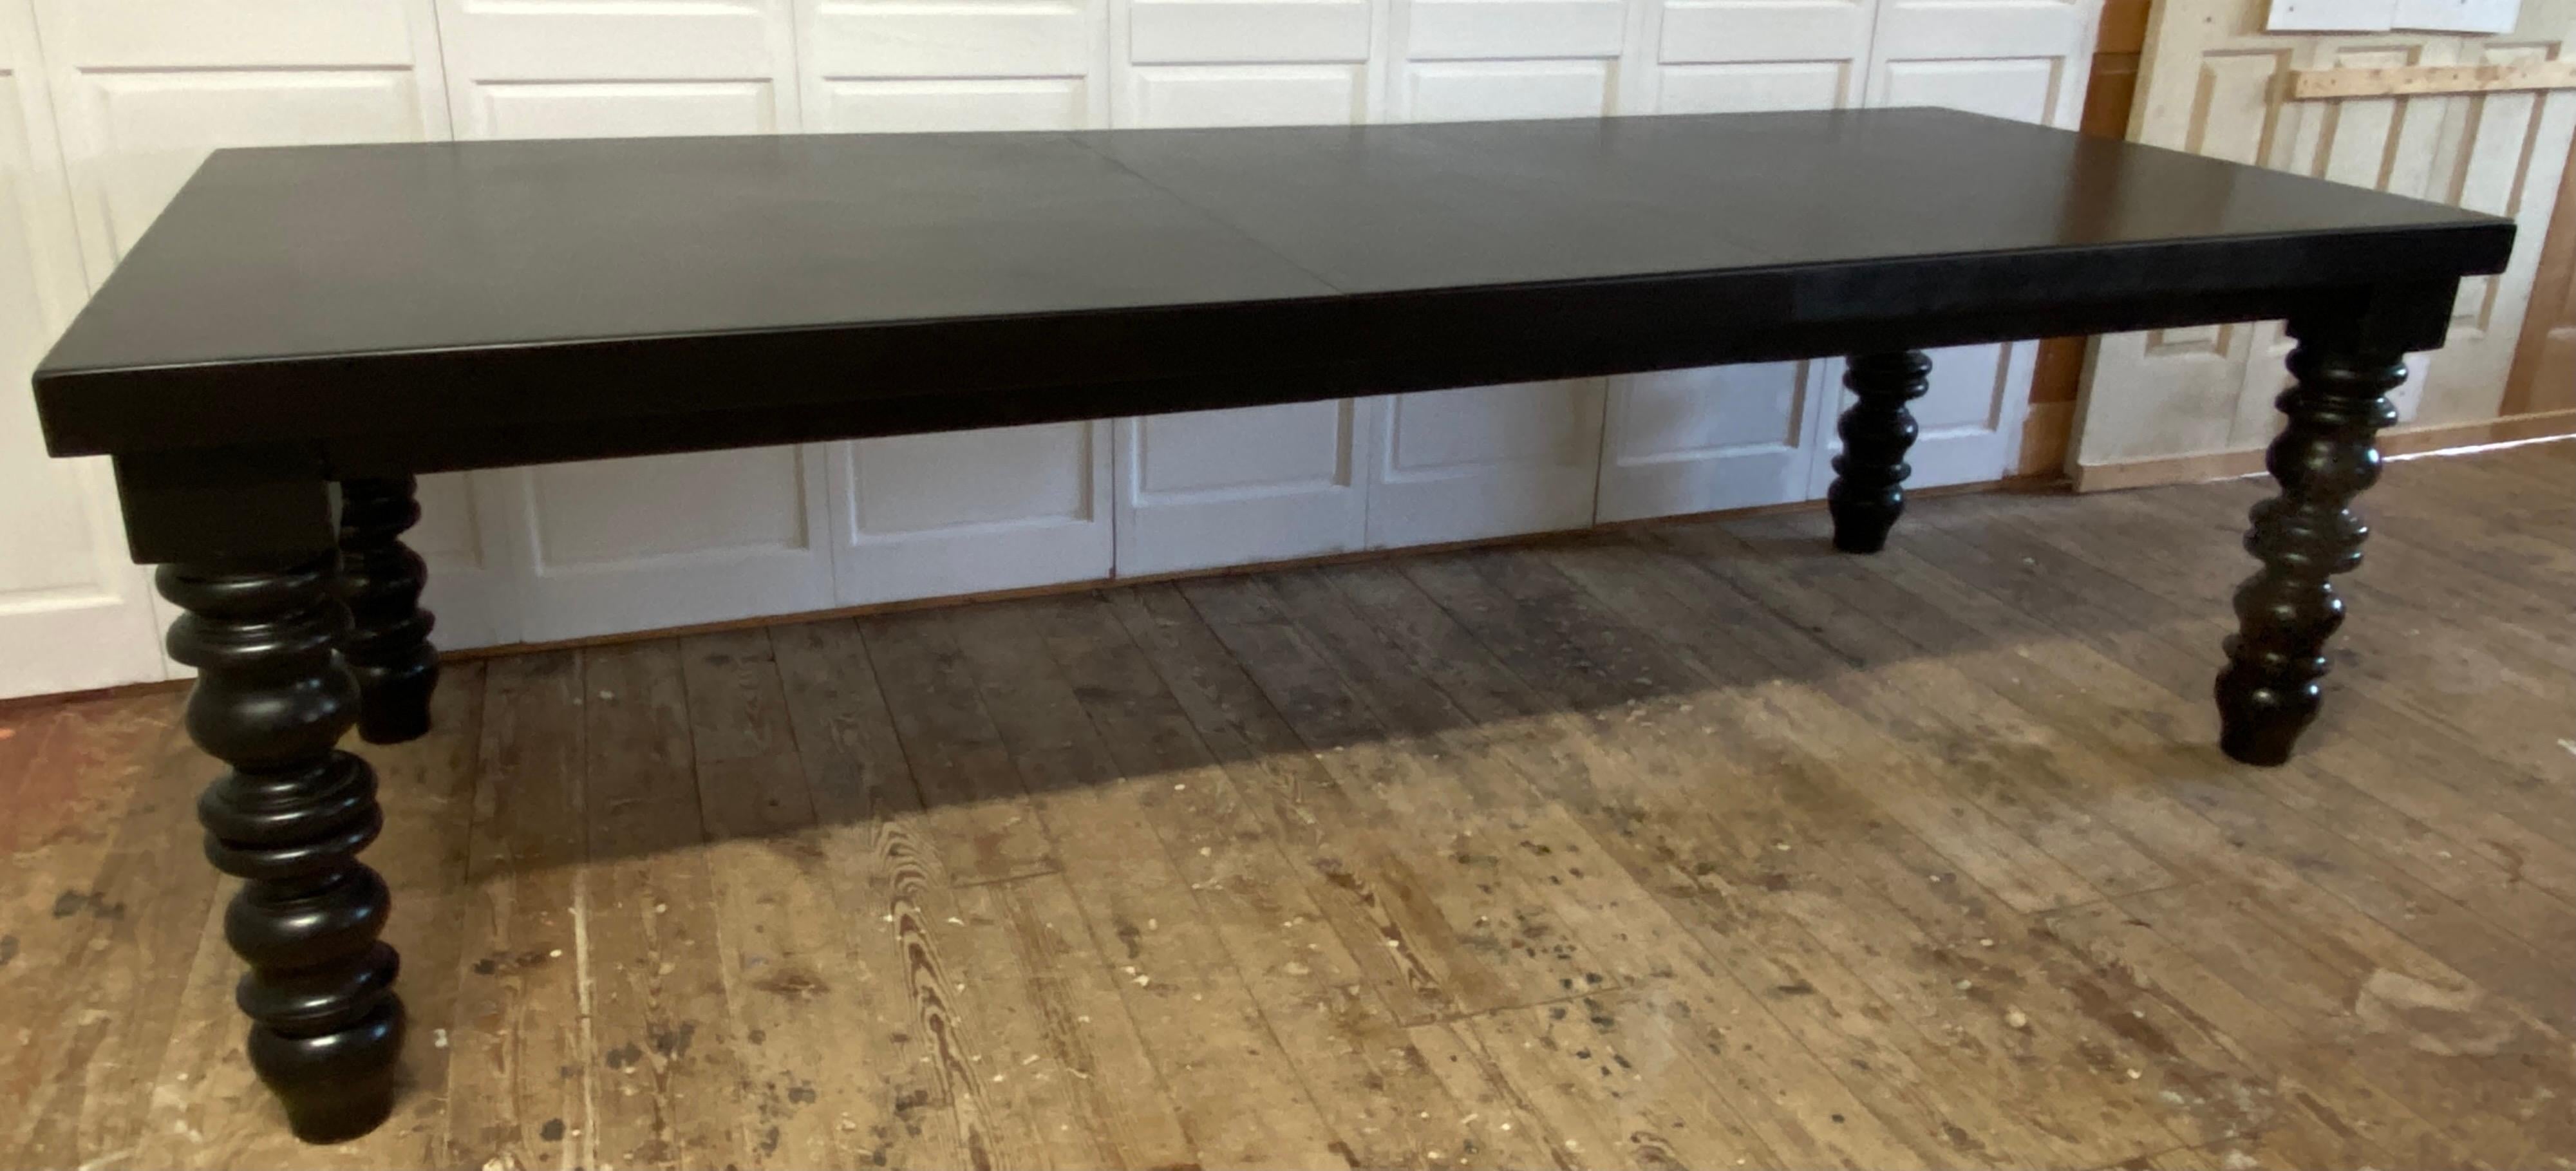 Drexel Dining Table with Oversize Turned Legs For Sale 2